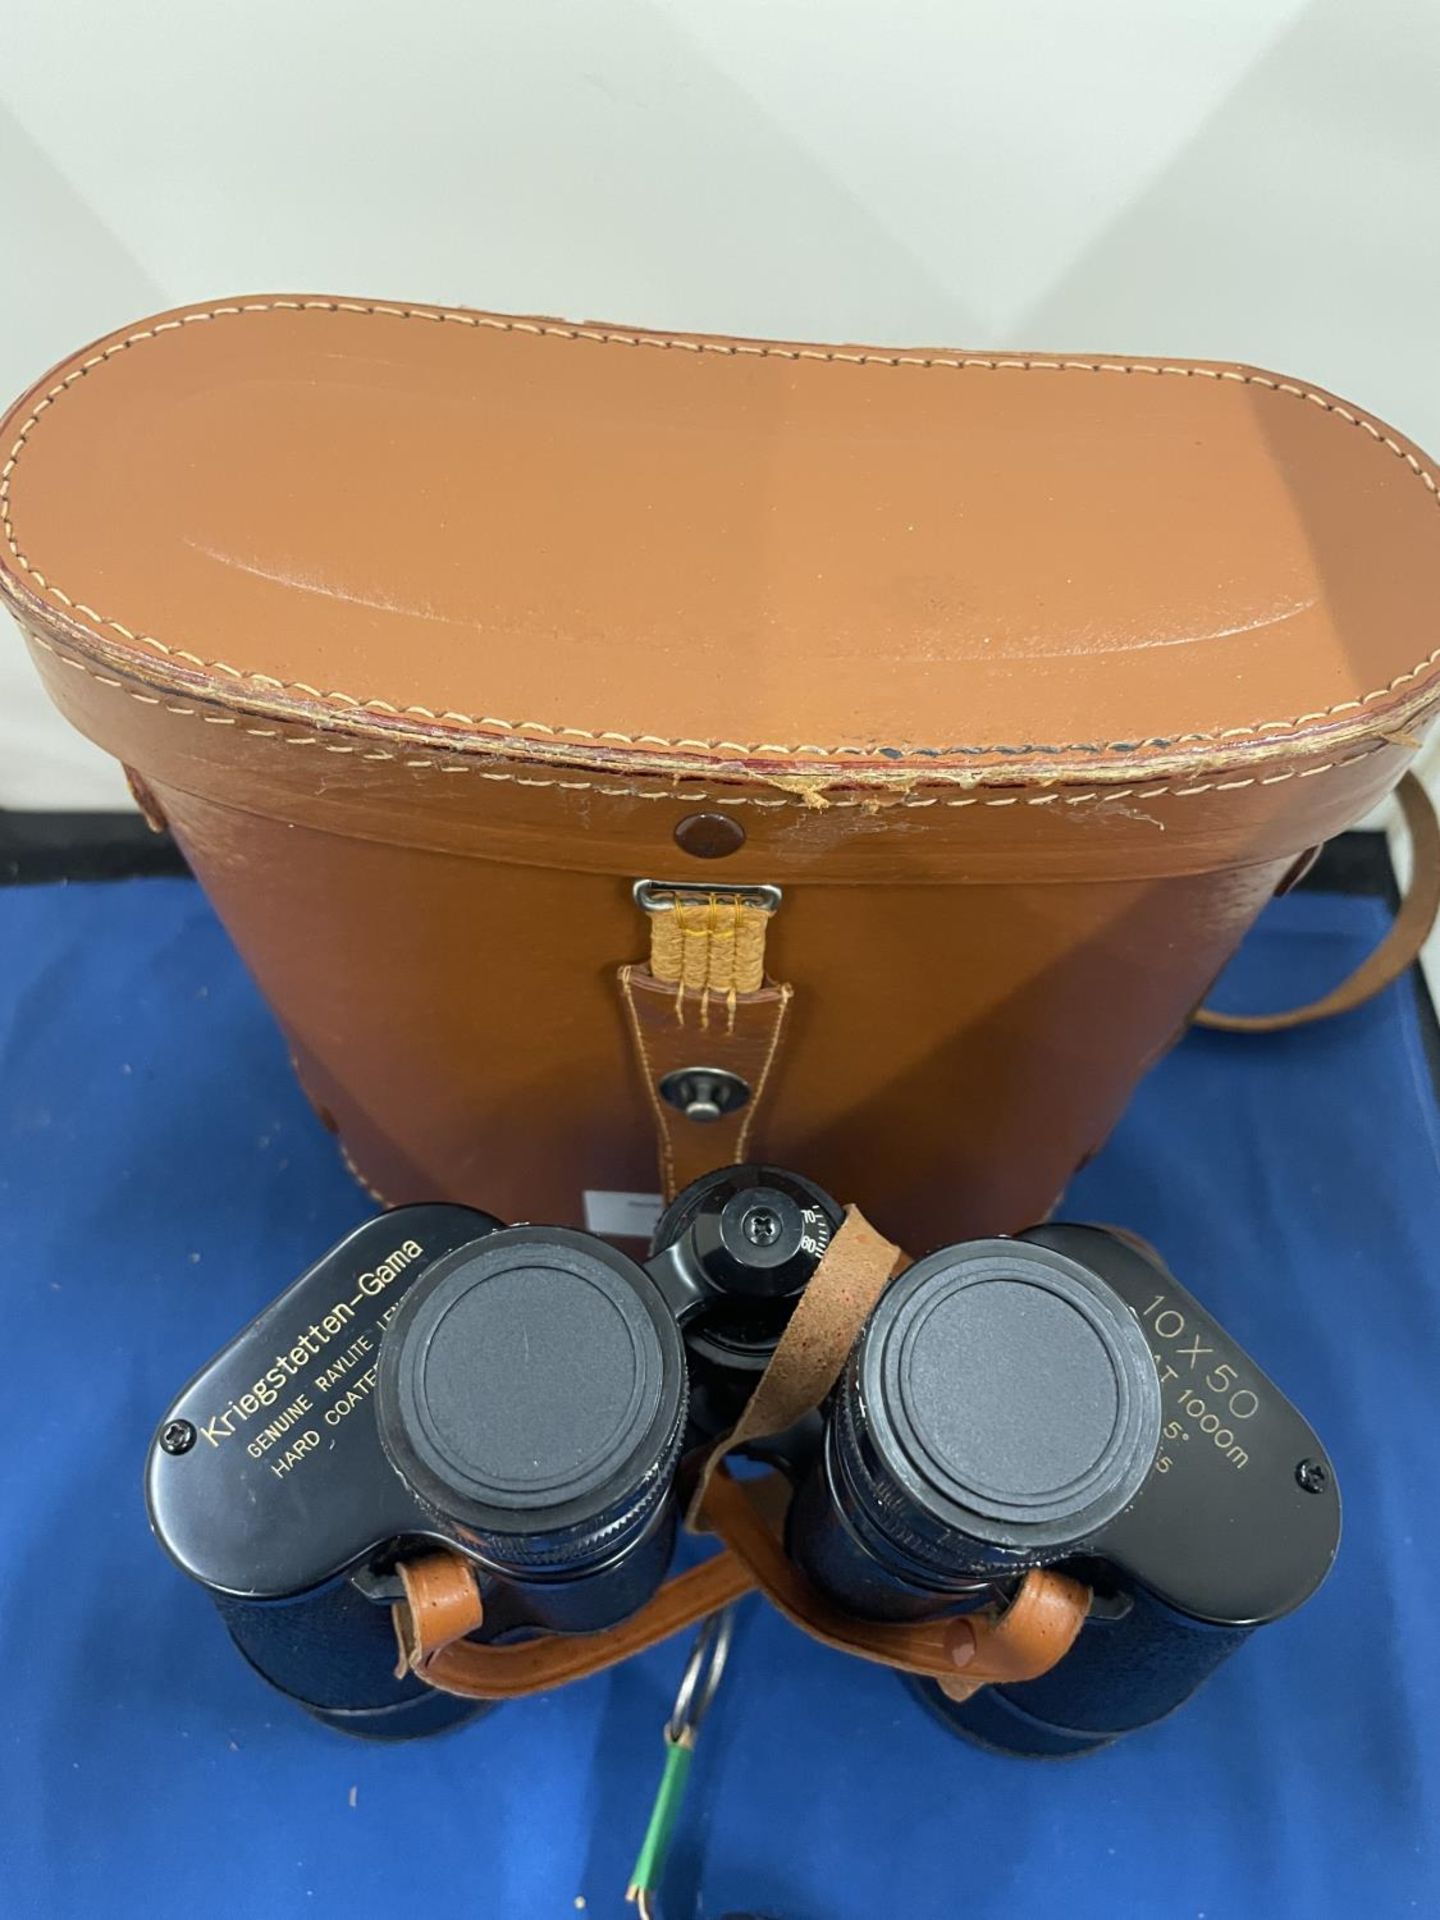 A PAIR OF KRIEGSTETTEN - GAMA BINOCULARS IN A LEATHER CASE WITH A VINTAGE LEATHER TAPE MEASURE - Bild 3 aus 8